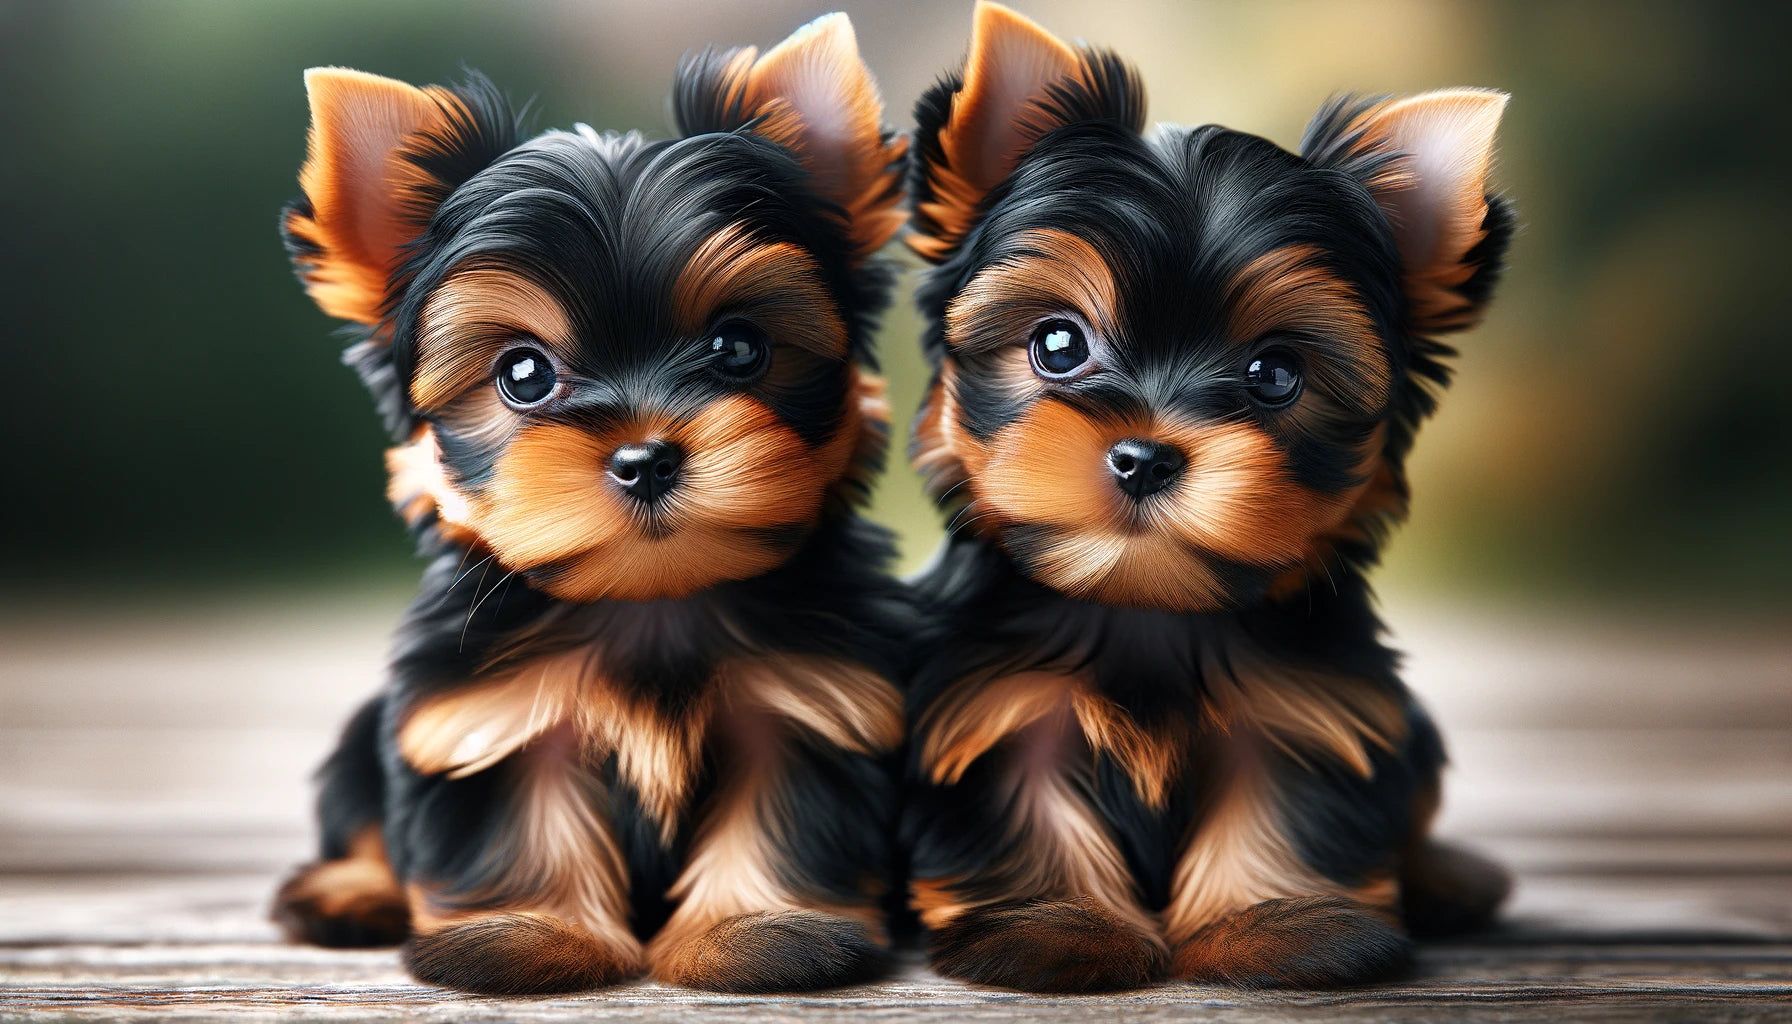 Two Adorable Teacup Yorkie Puppies - They appear to be very young with their small size and puppy-like features.